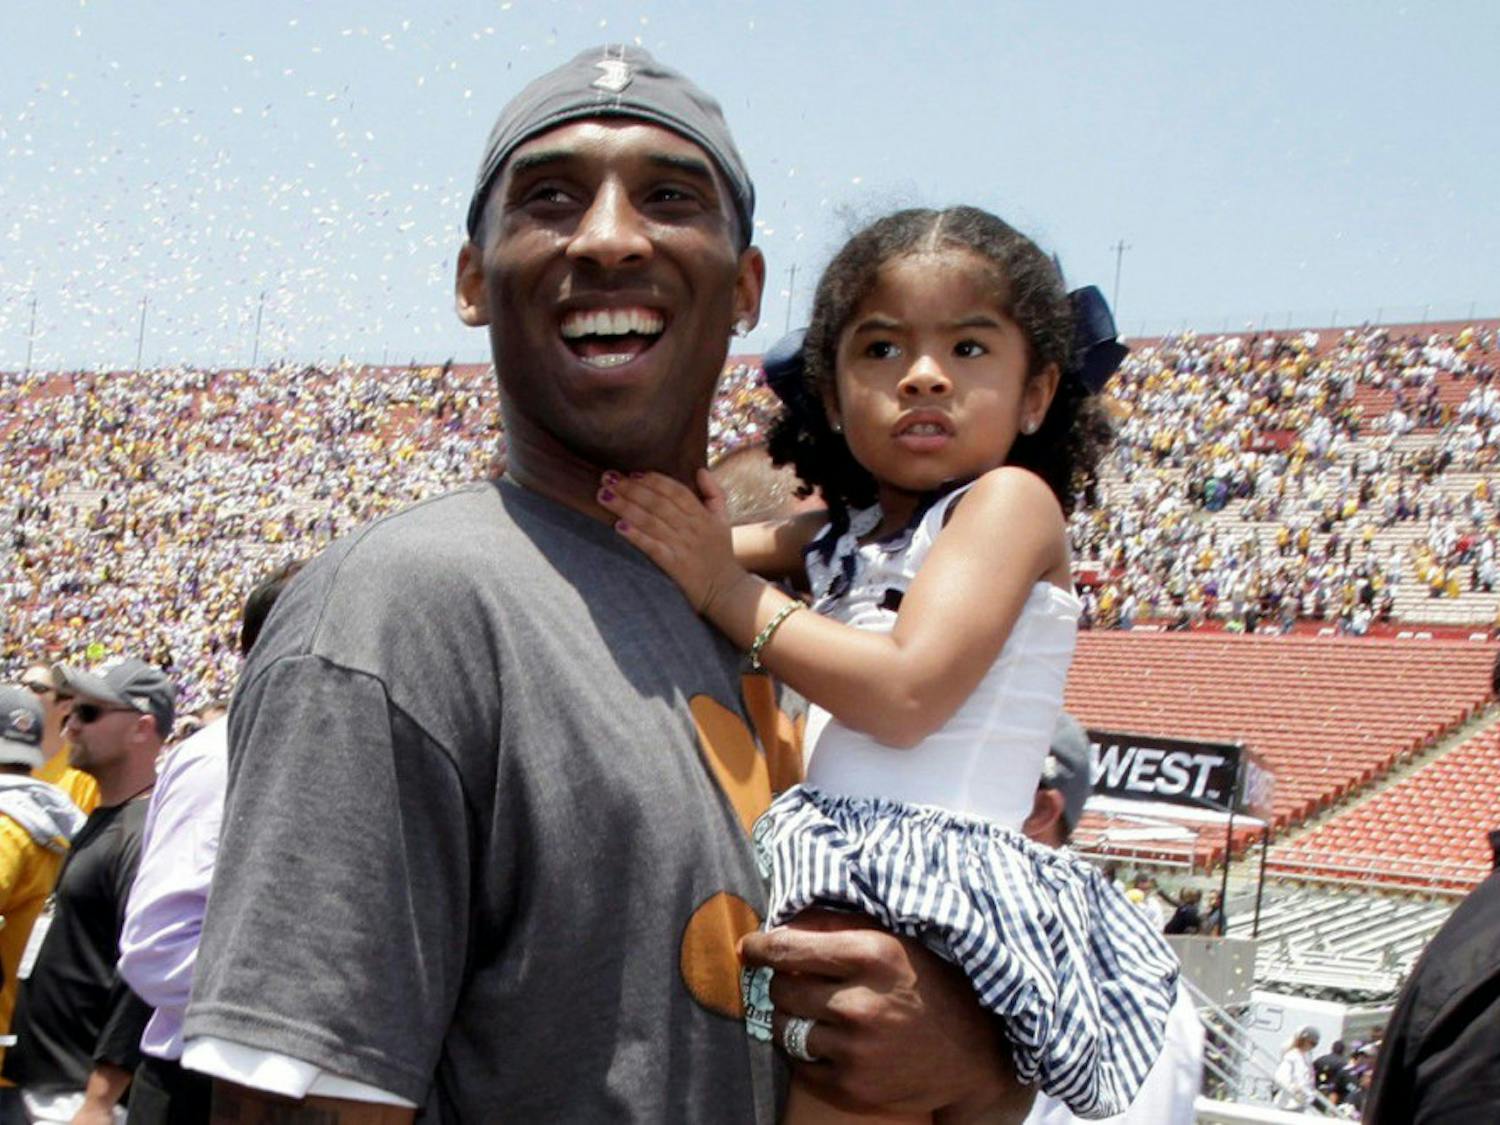 In this June 17, 2009 file photo Los Angeles Lakers' Kobe Bryant smiles as he and his daughter Gianna Maria-Onore walk up the steps after the victory parade celebrating the Lakers' NBA championship in Los Angeles. Bryant, the 18-time NBA All-Star who won five championships and became one of the greatest basketball players of his generation during a 20-year career with the Los Angeles Lakers, died in a helicopter crash Sunday, Jan. 26, 2020. Gianna also died in the crash. (AP Photo/Jae C. Hong, file)